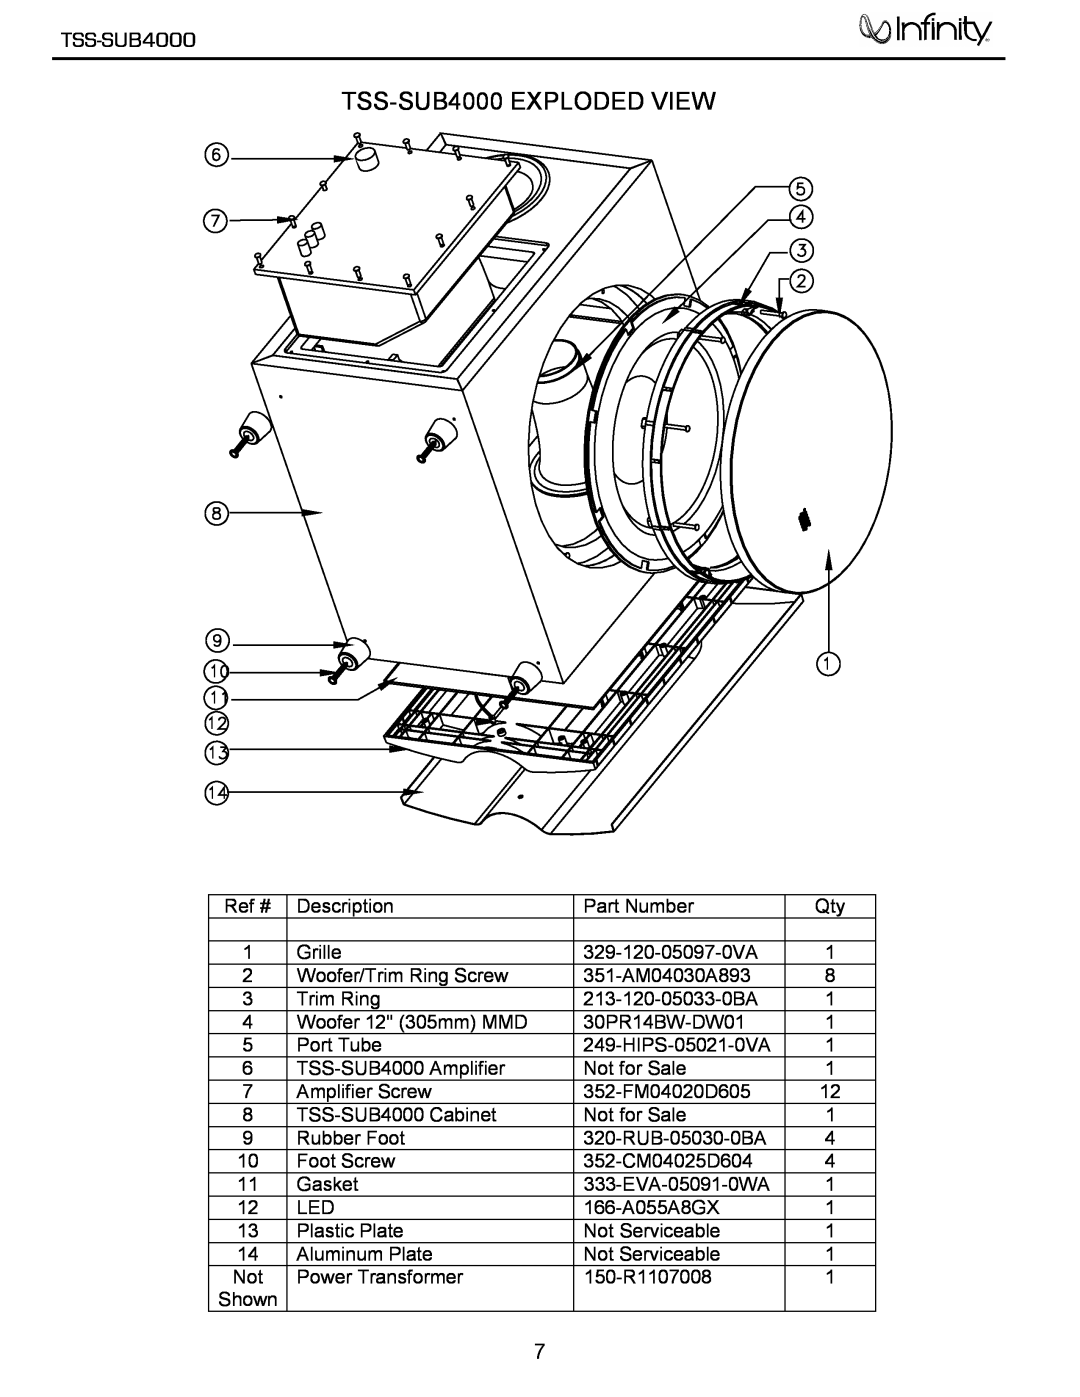 Infinity service manual TSS-SUB4000EXPLODED VIEW 